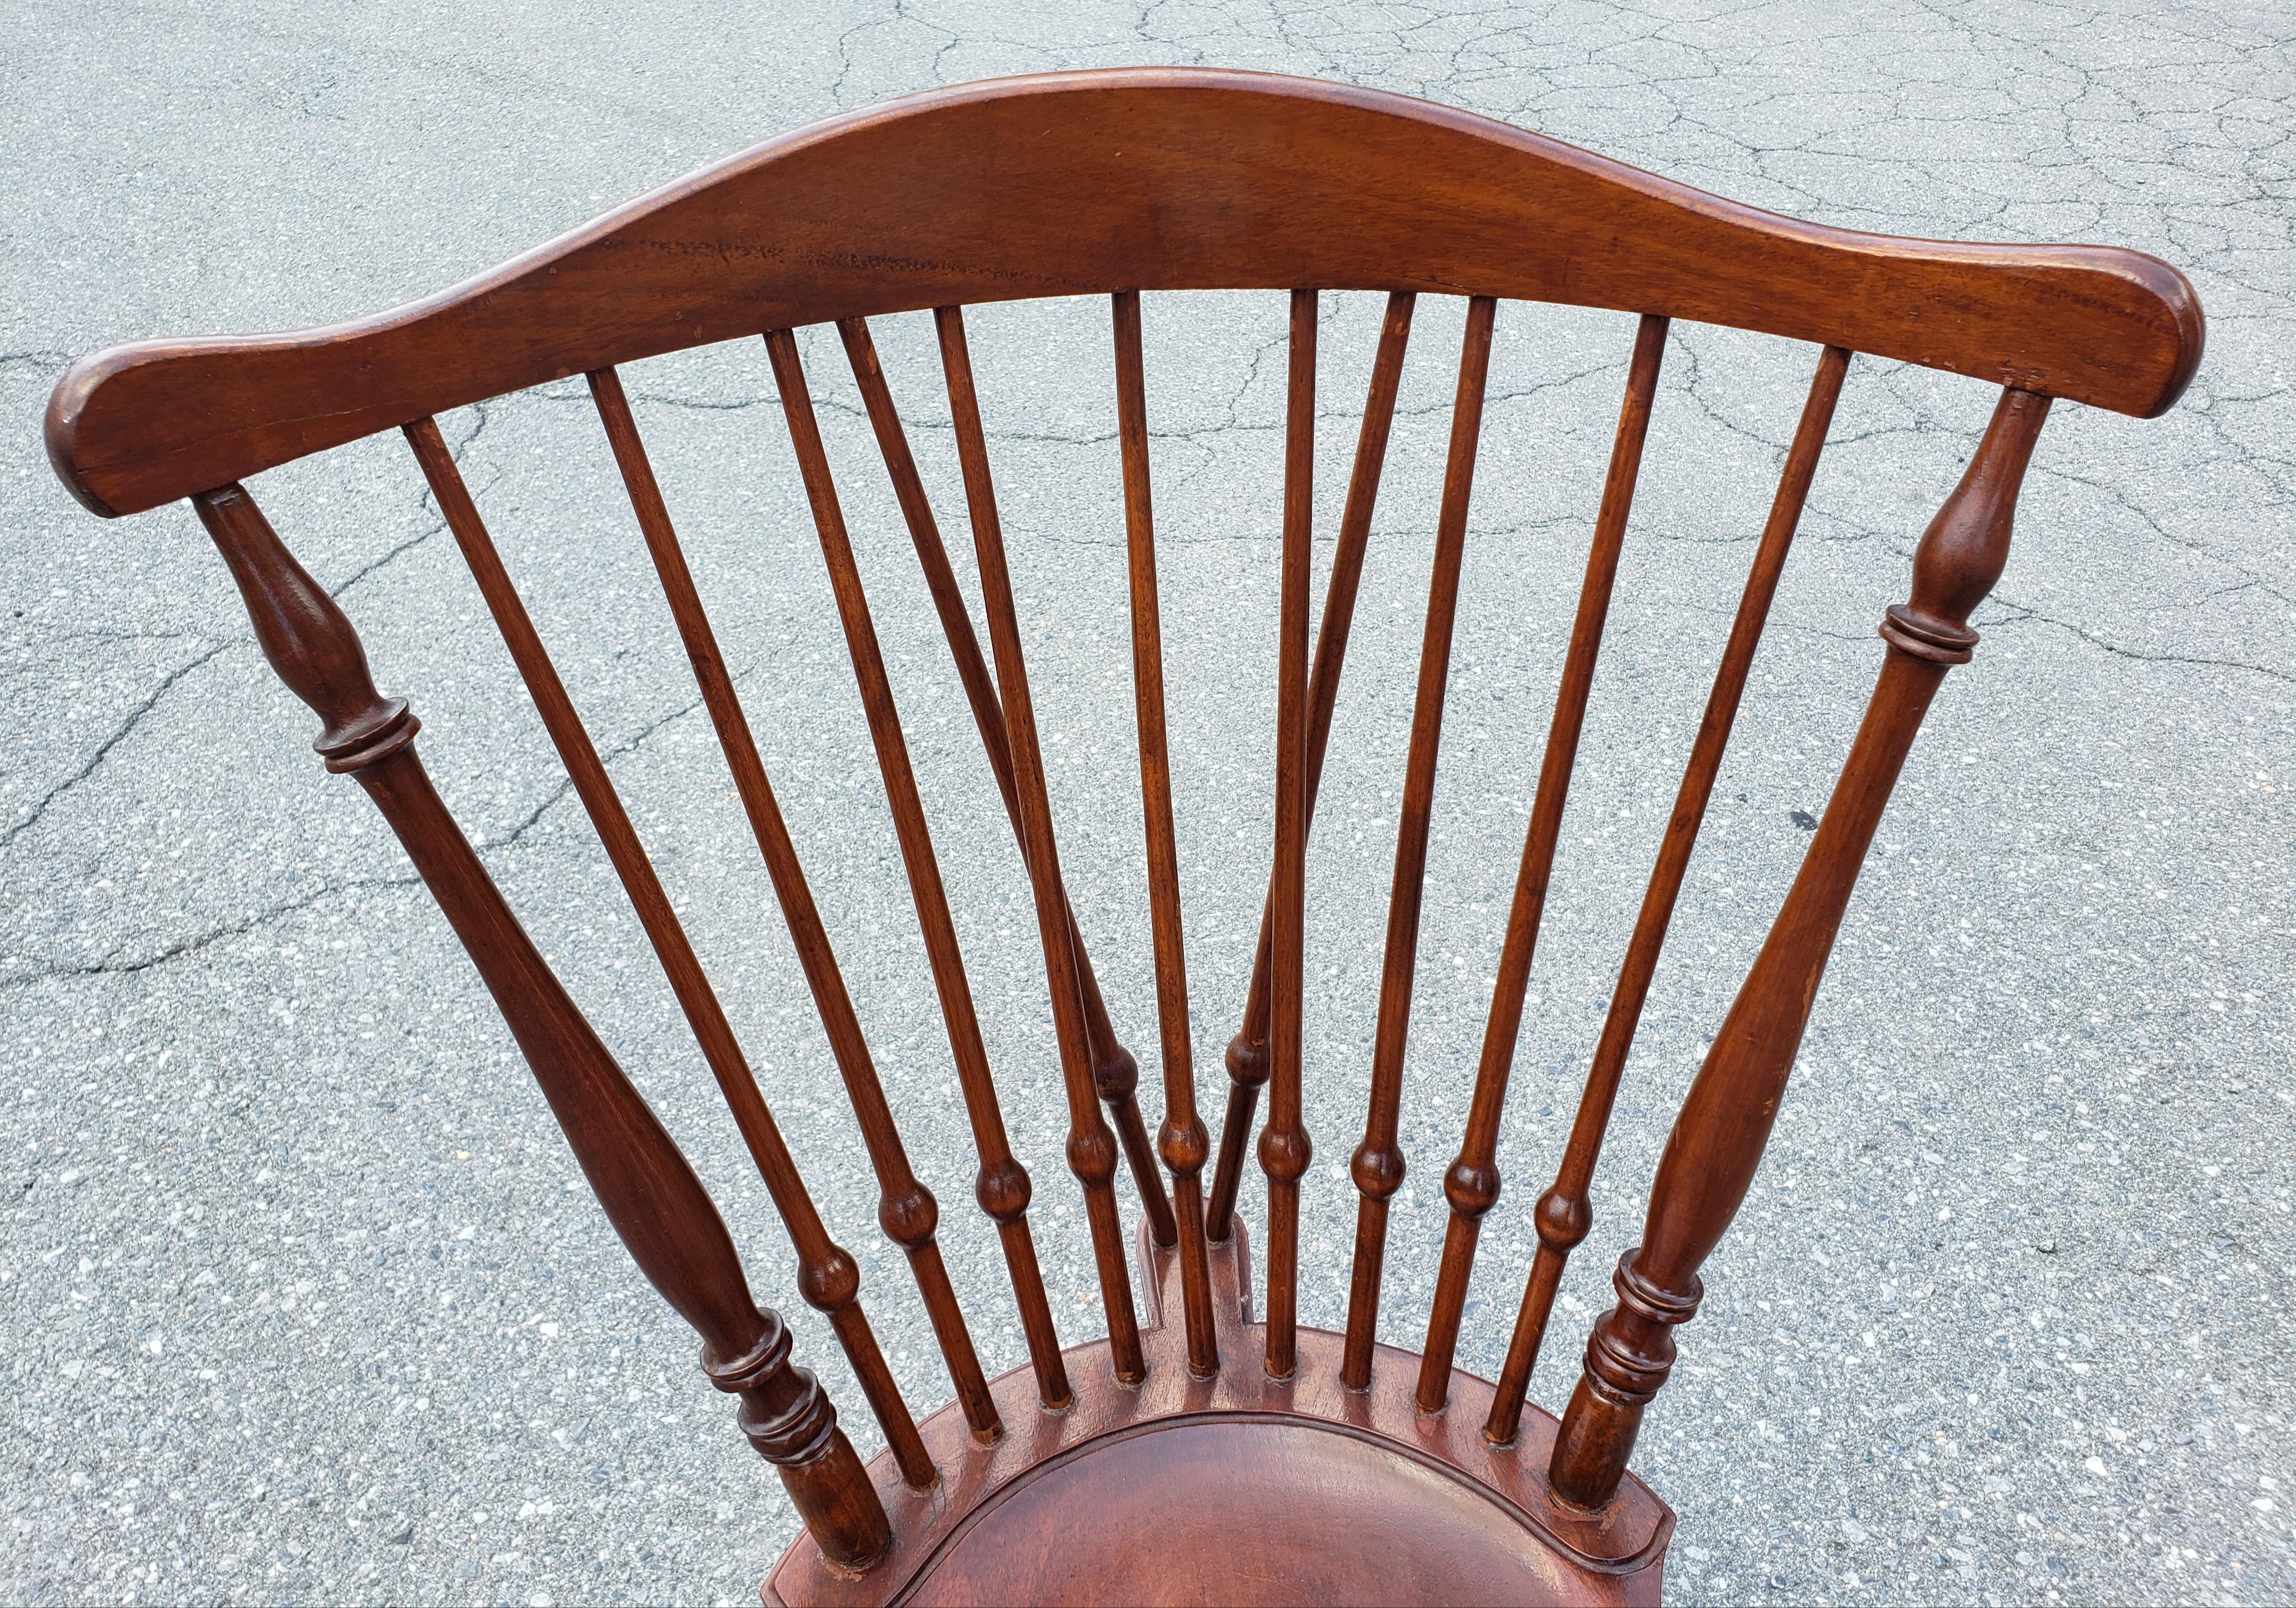 Hand-Crafted Mid-Century Mahogany Brace Back Sadle Seat Windsor Chair W Brass Leg Caps  For Sale